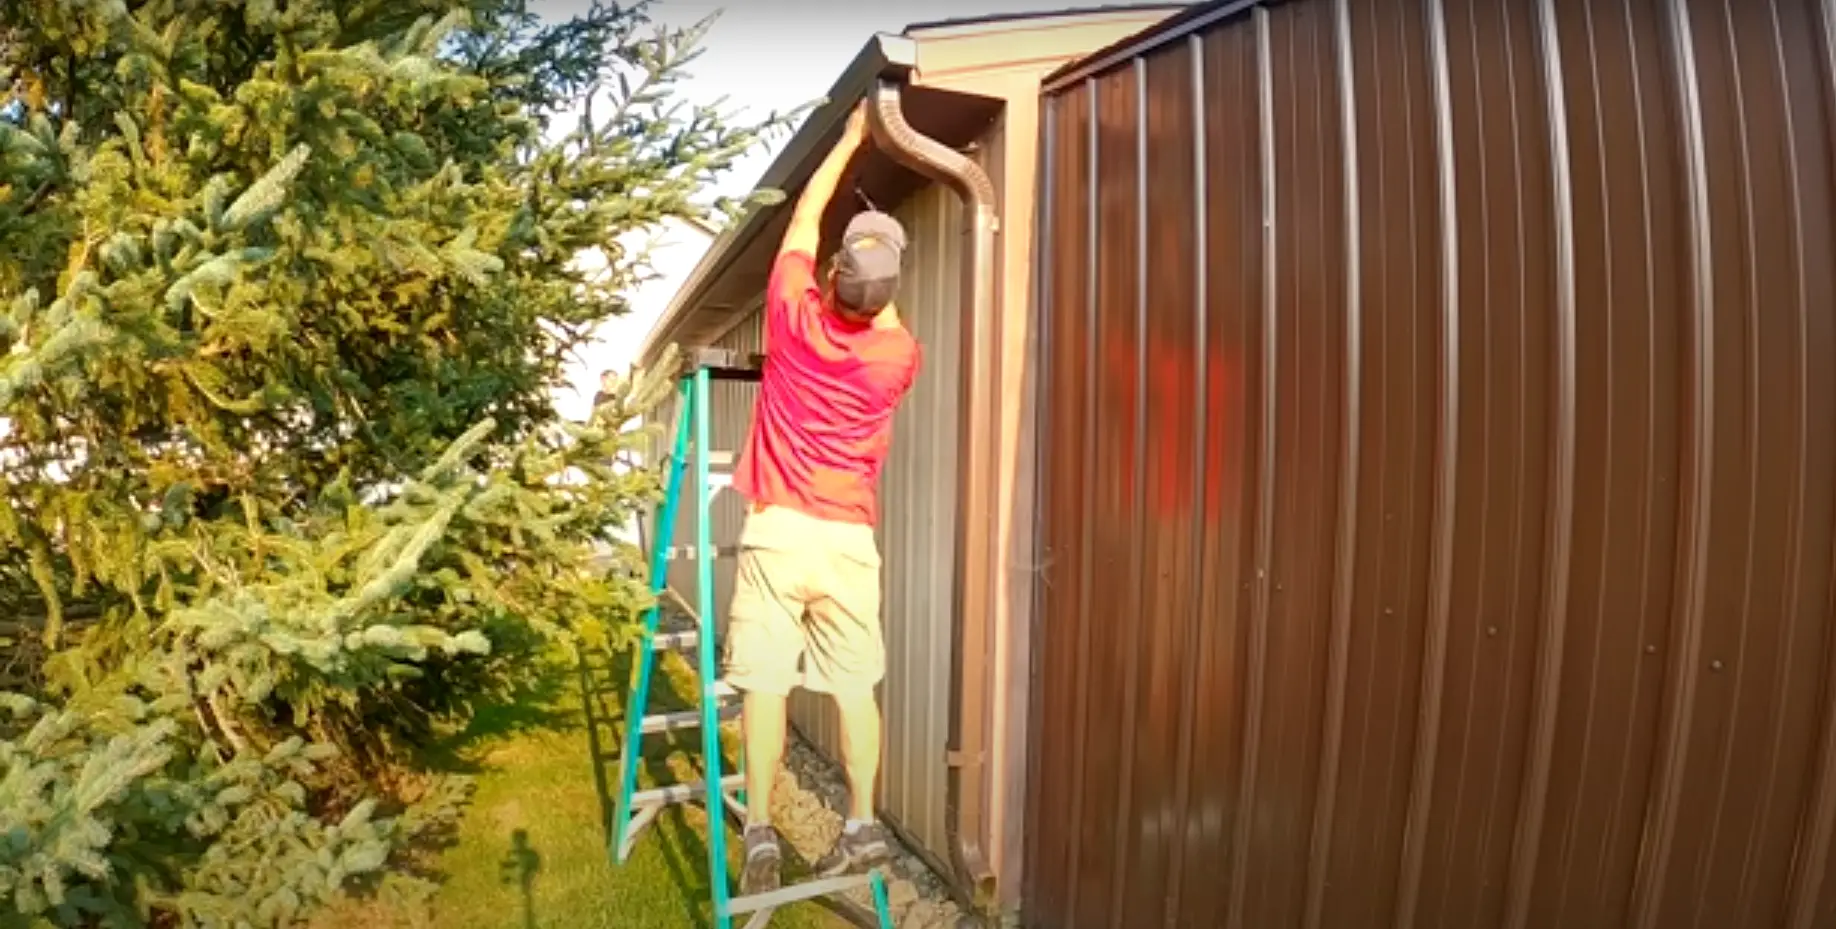 How Do You Paint An Old Metal Shed?